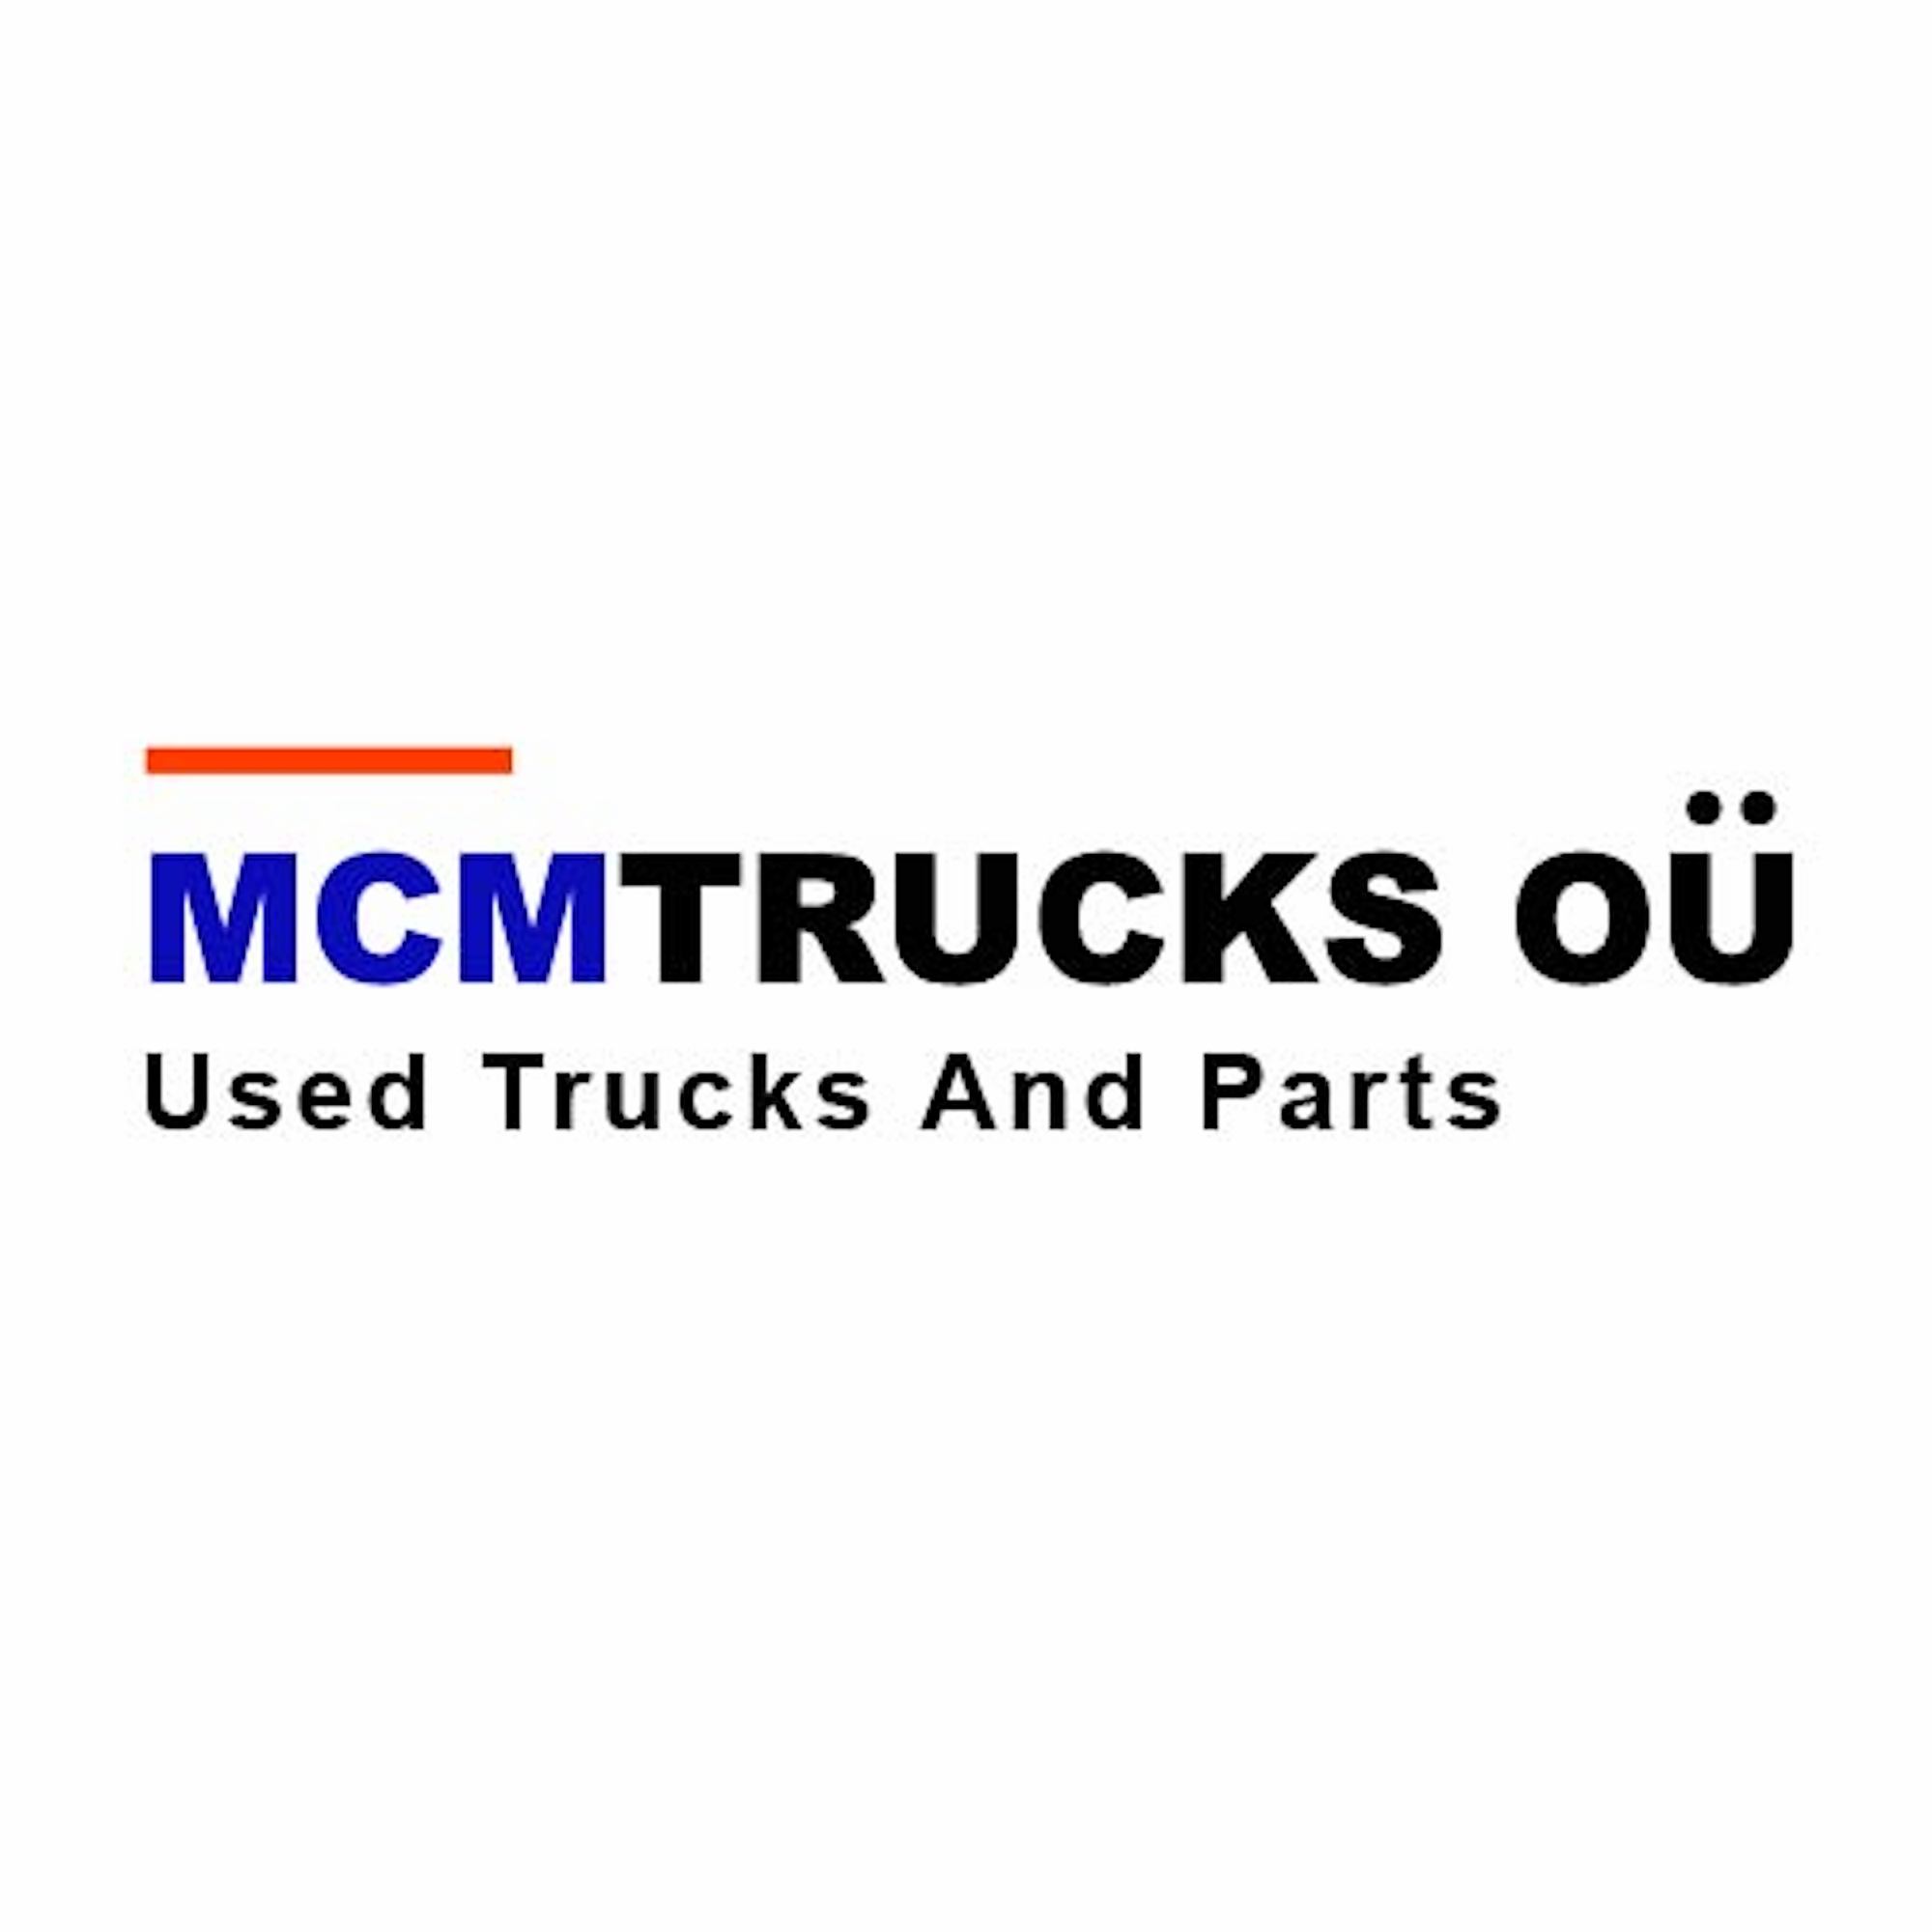 MCMTrucks OU undefined: picture 1